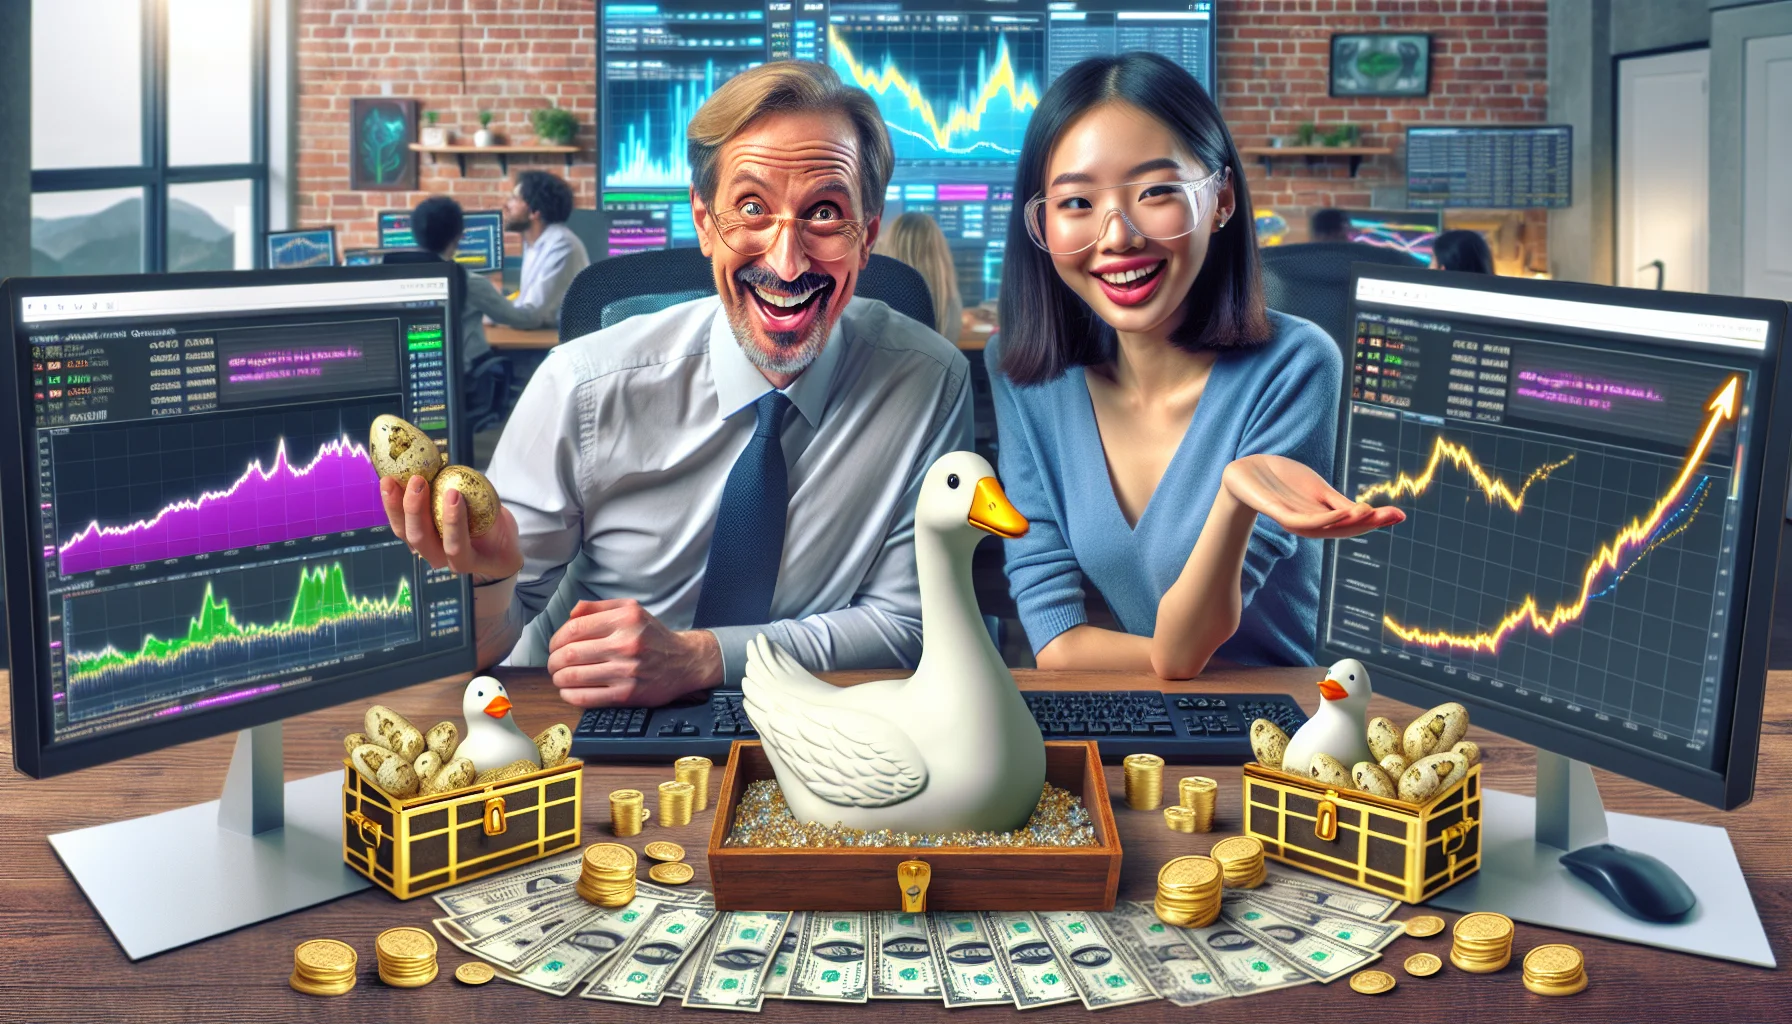 Generate a humorous, realistic image featuring a mid-age Caucasian man and a young Asian woman, both portrayed as e-affiliate marketers. They're in a bustling, creative home office space, surrounded by multiple monitors displaying graph charts and various currencies. They are cheerfully watching the monitors which are showing a continuous increase in their online earnings. The Caucasian man is holding a golden goose laying eggs made of dollar bills, symbolizing their successful online revenue. To make it more enticing, let there be a glowing digital treasure chest filled with coins and gems on their desk, symbolizing the wealth generated online.